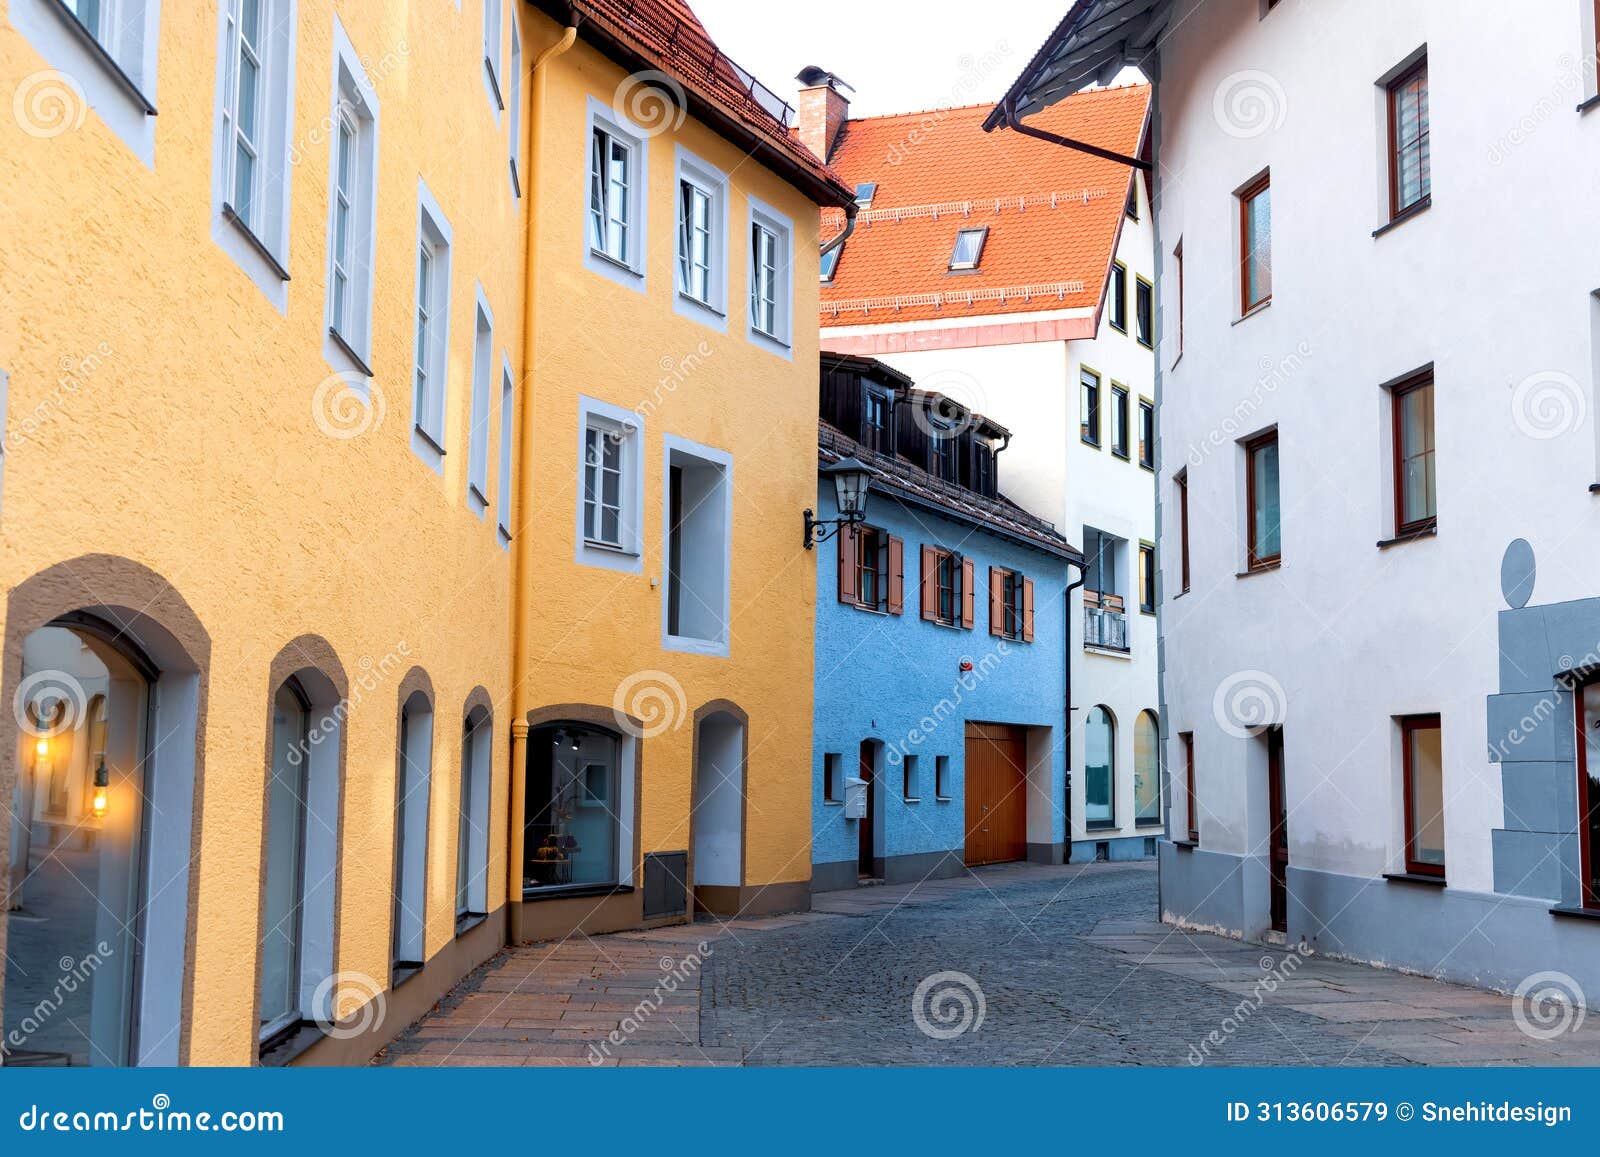 colorful buildings along a street in historic fussen, is a small town in, germany